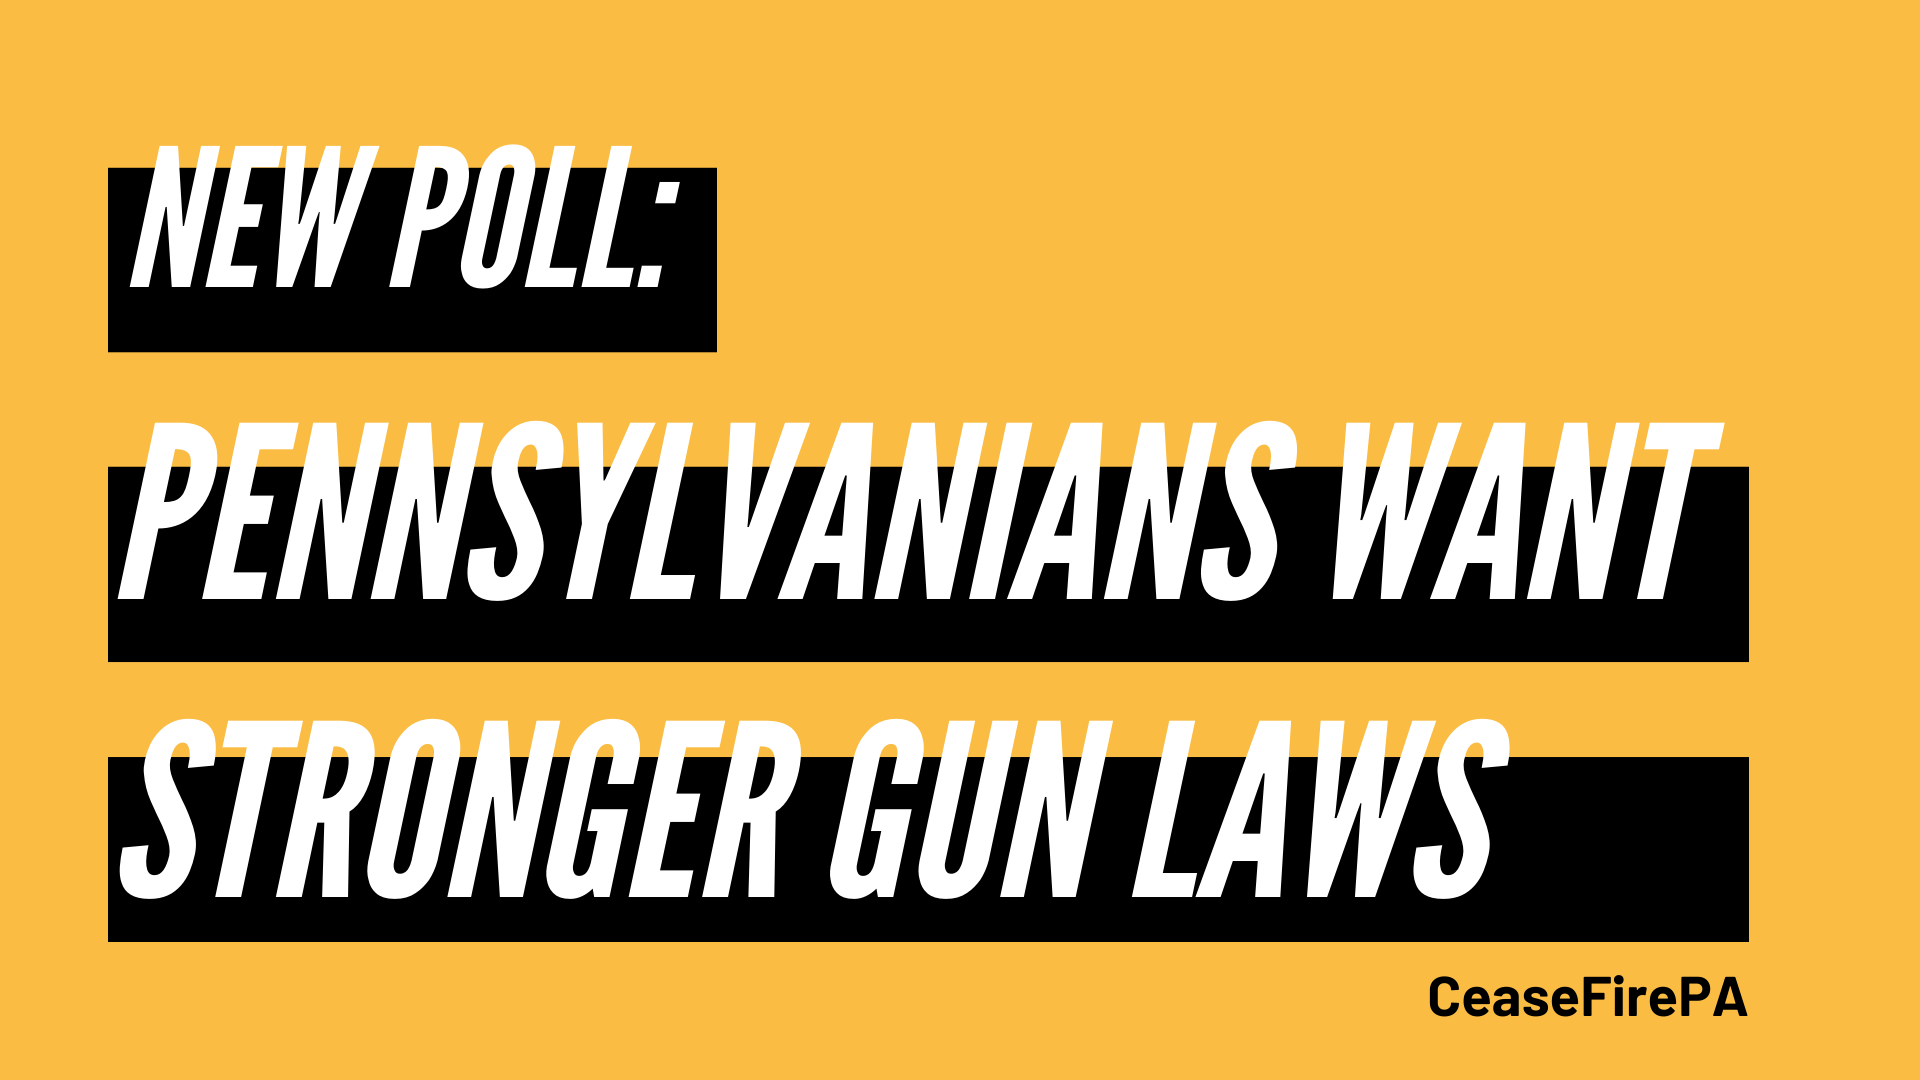 New Poll Finds Majority of PA Voters Support Stronger Gun Laws